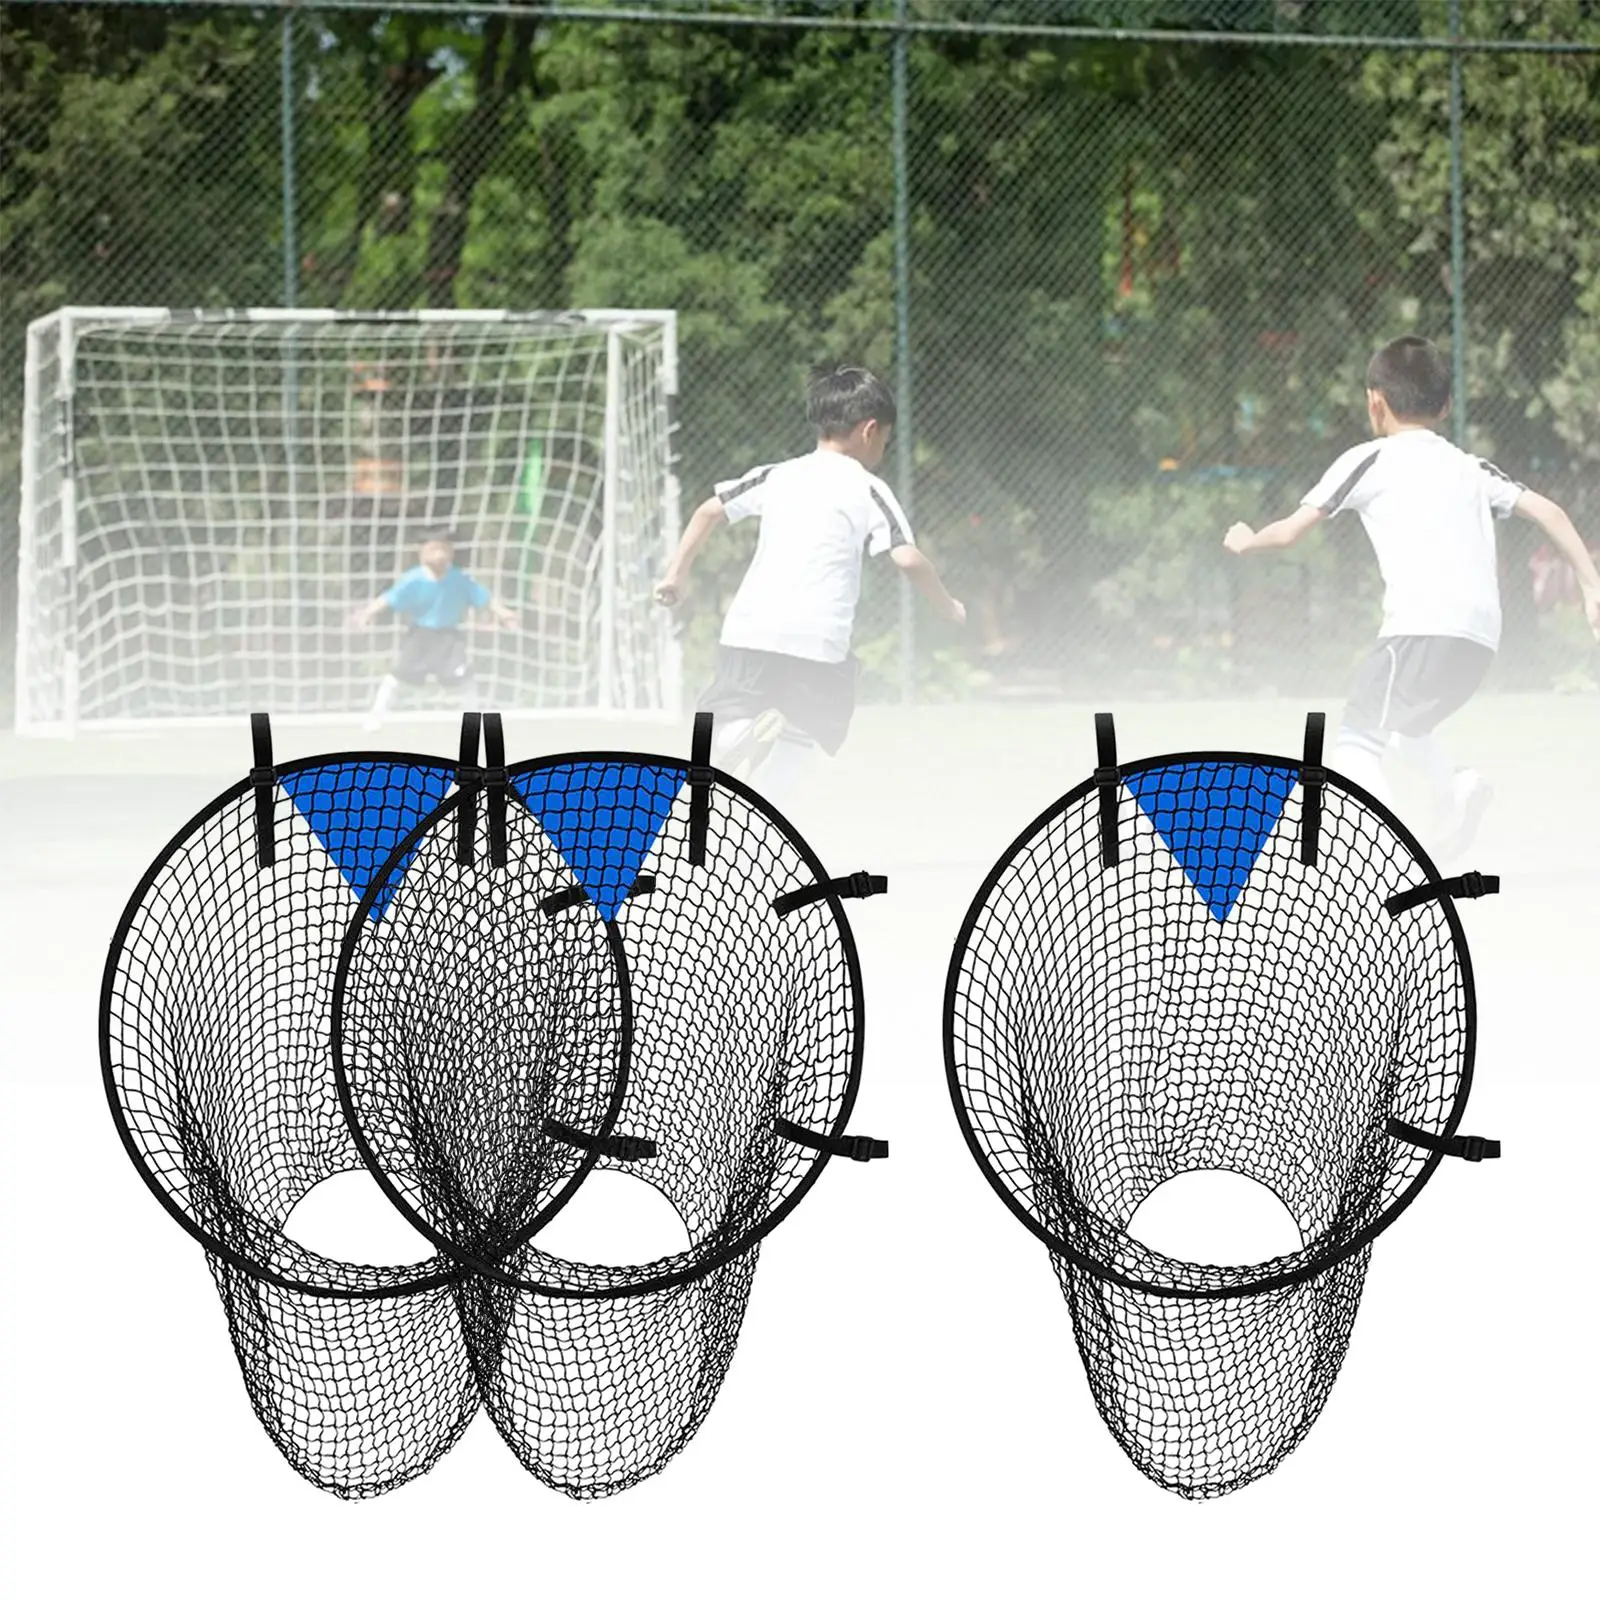 Football Training Net Football Games Practicing Easy to Attach and Detach Portable Football Target Net Football Accessories